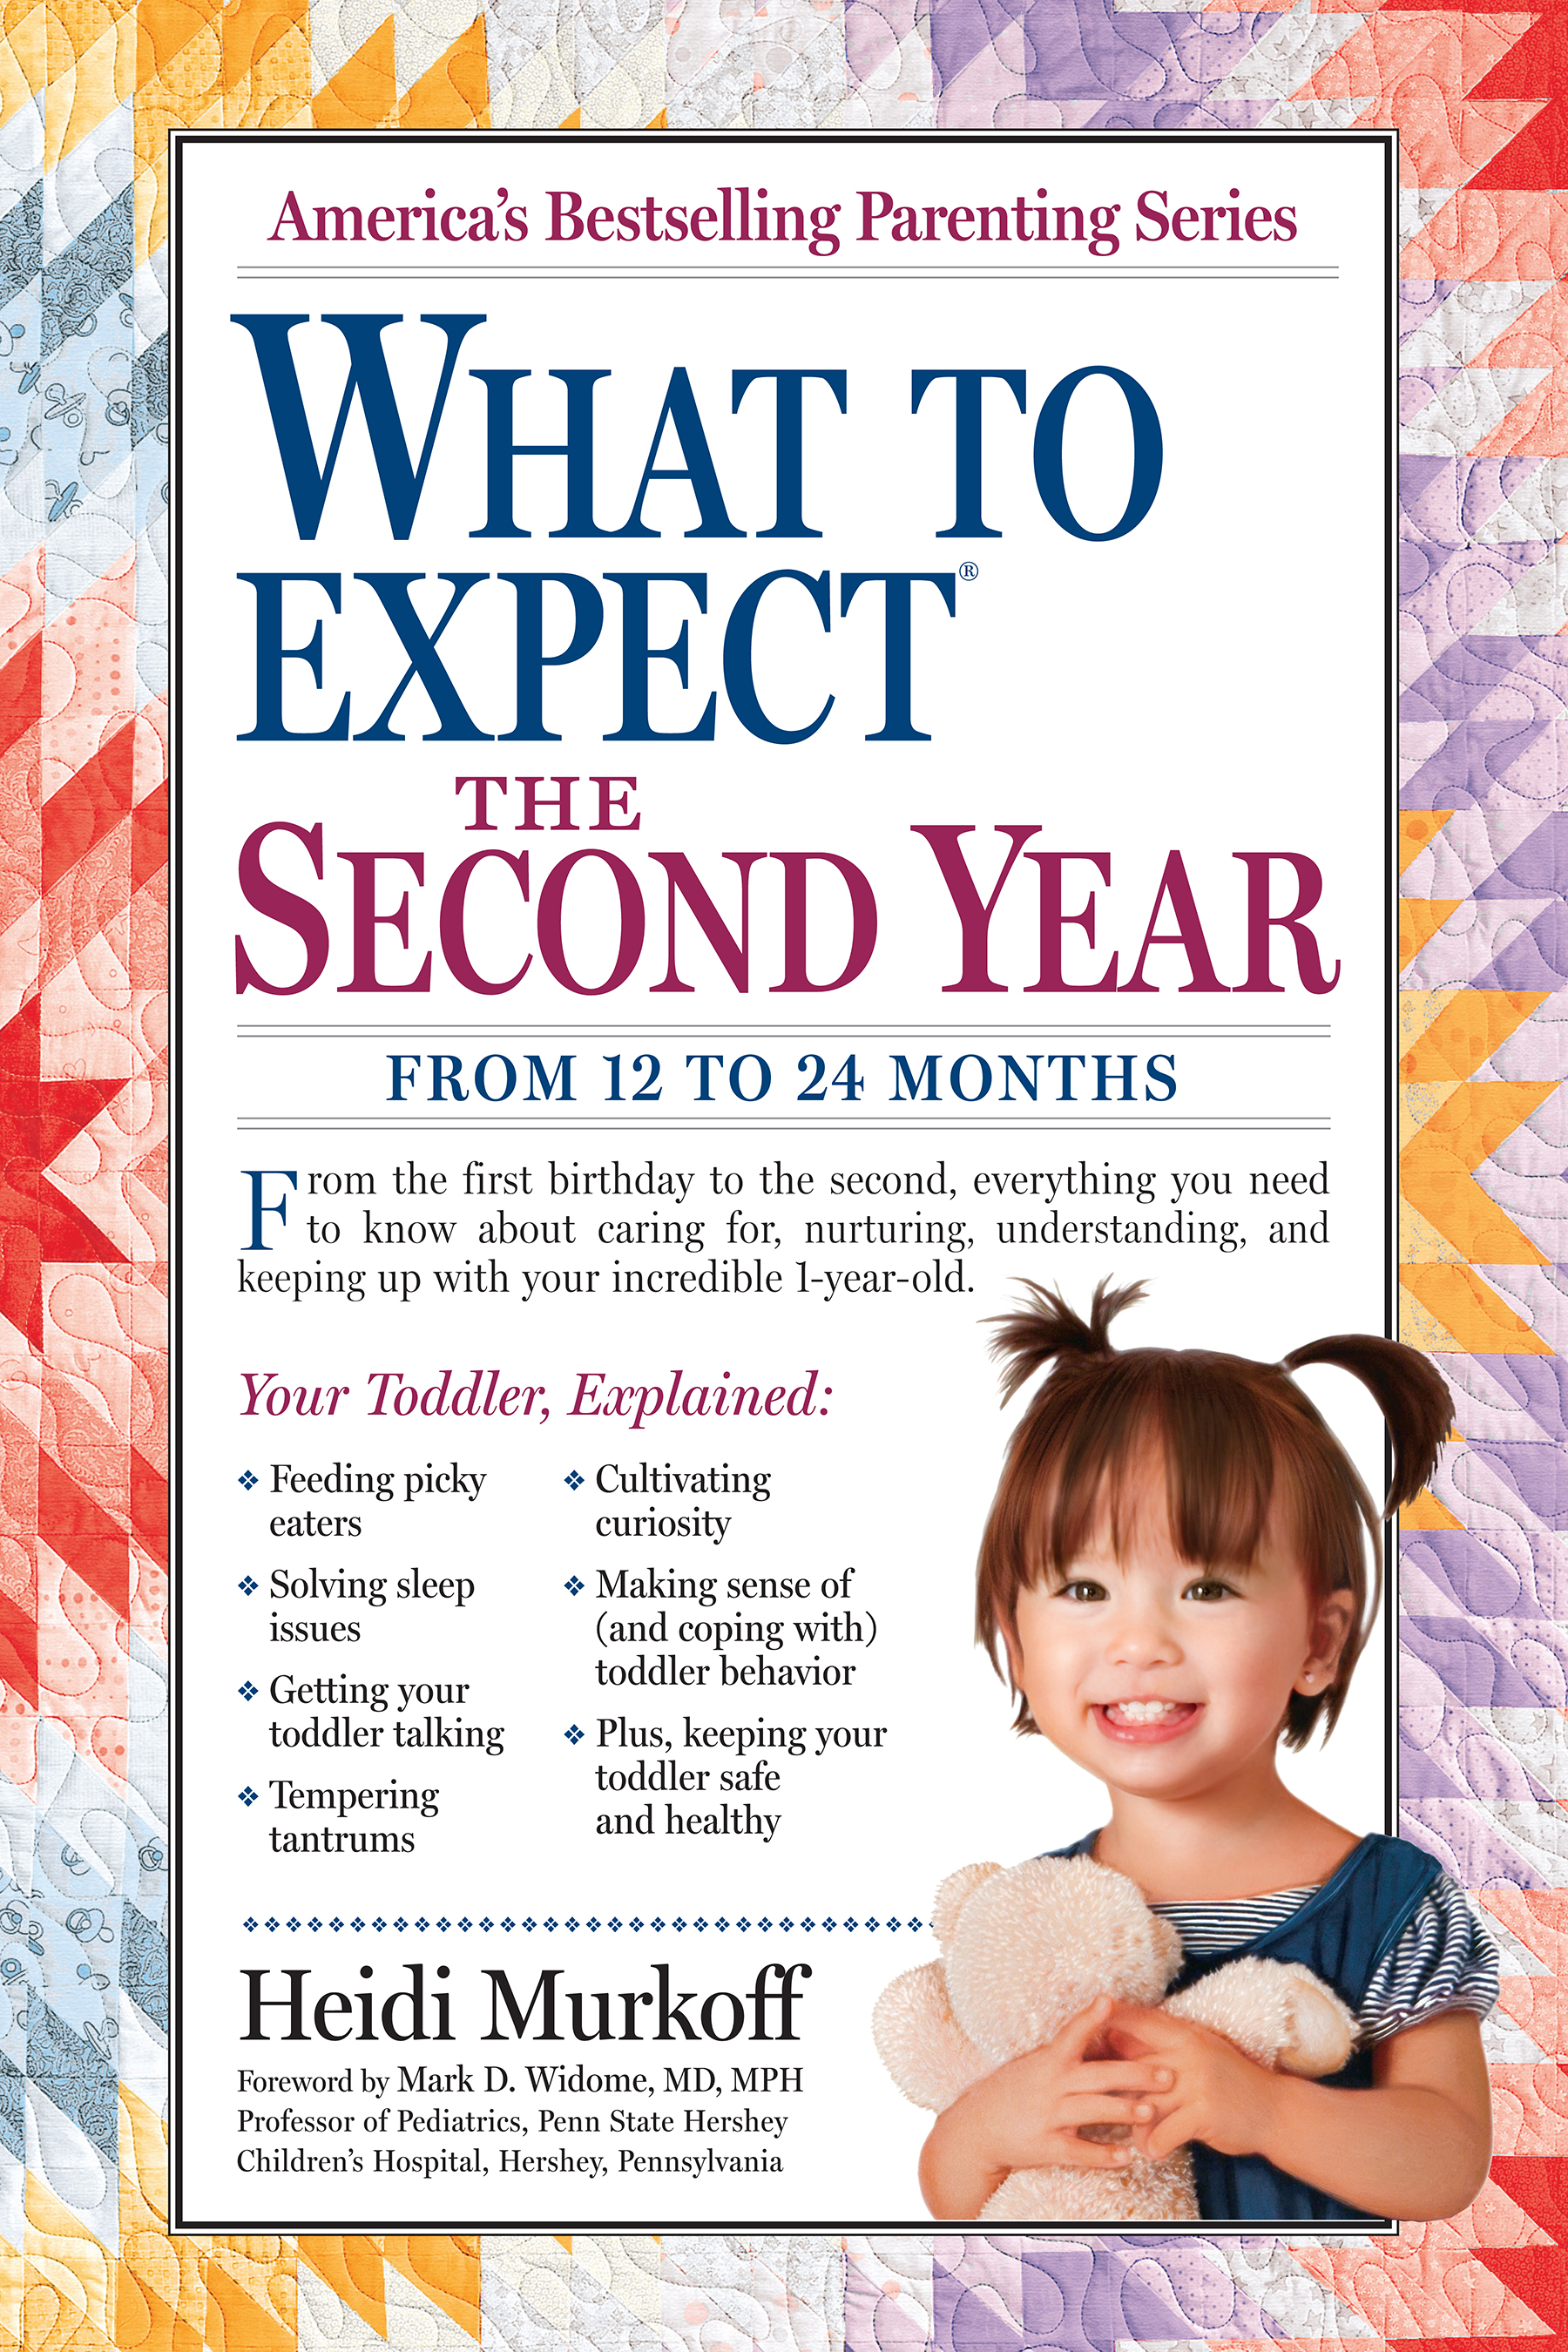 What to expect the second year from 12 to 24 months cover image